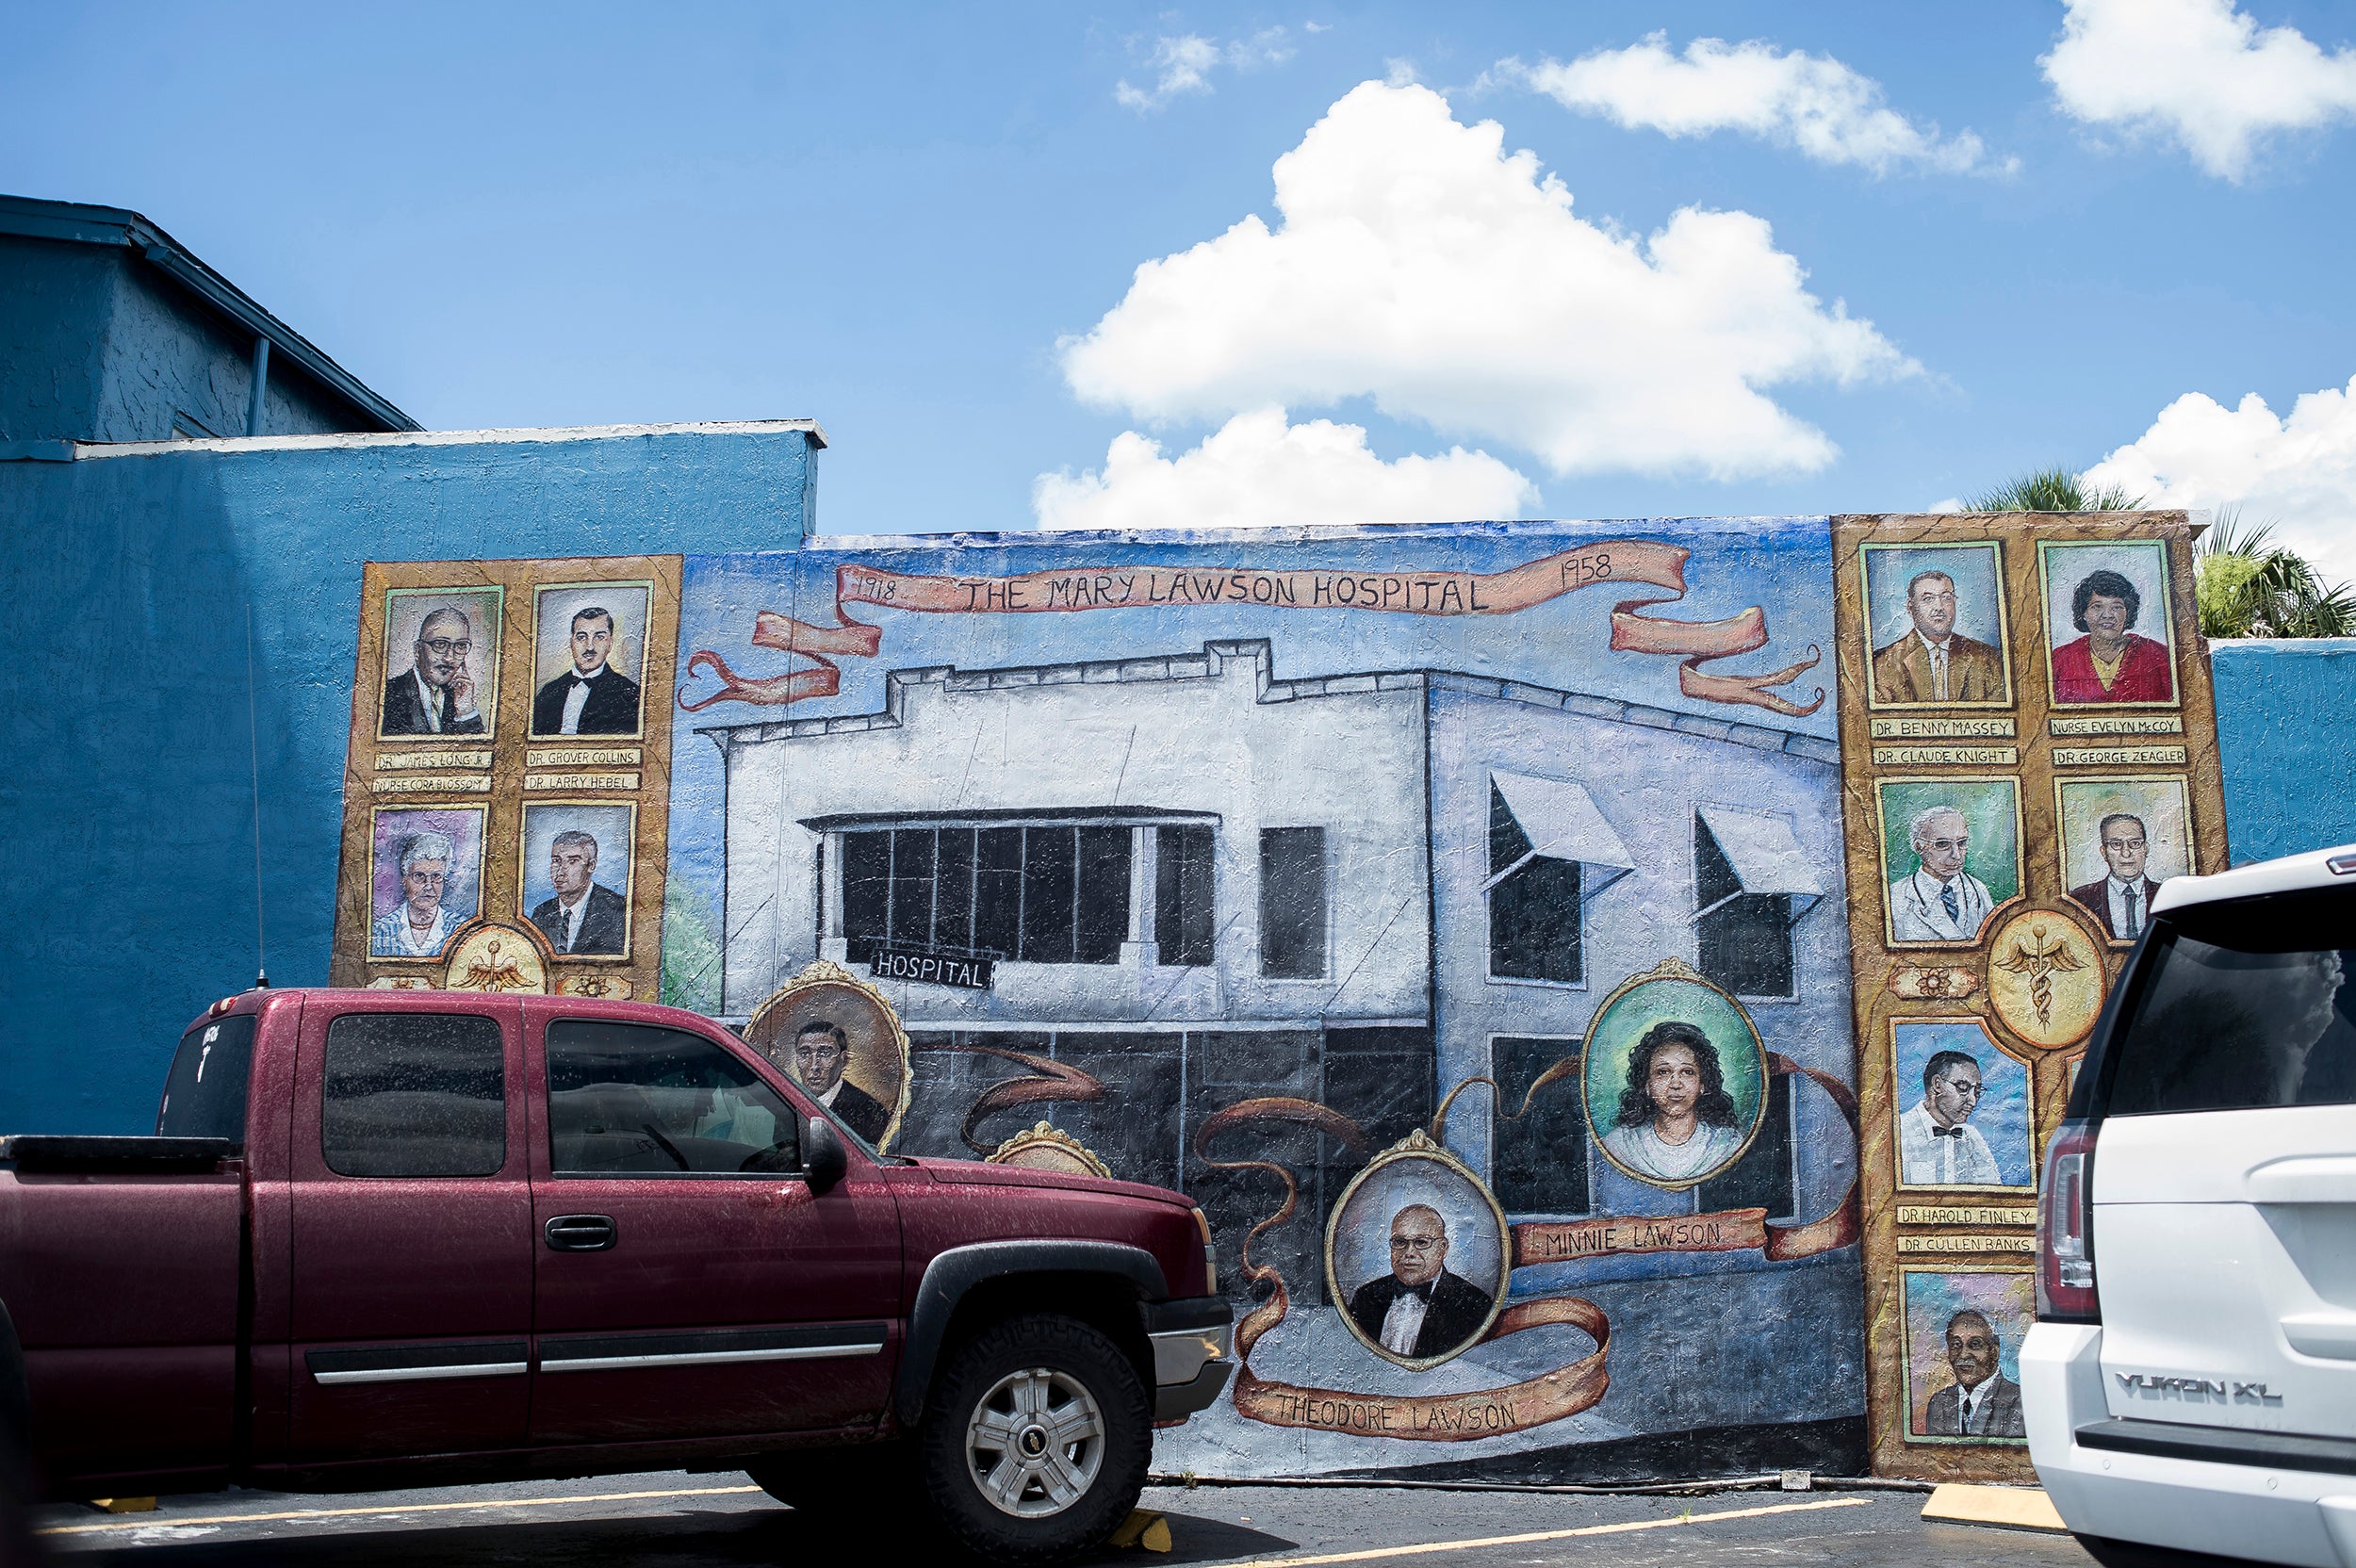 &#13;
A mural honours a prominent local family &#13;